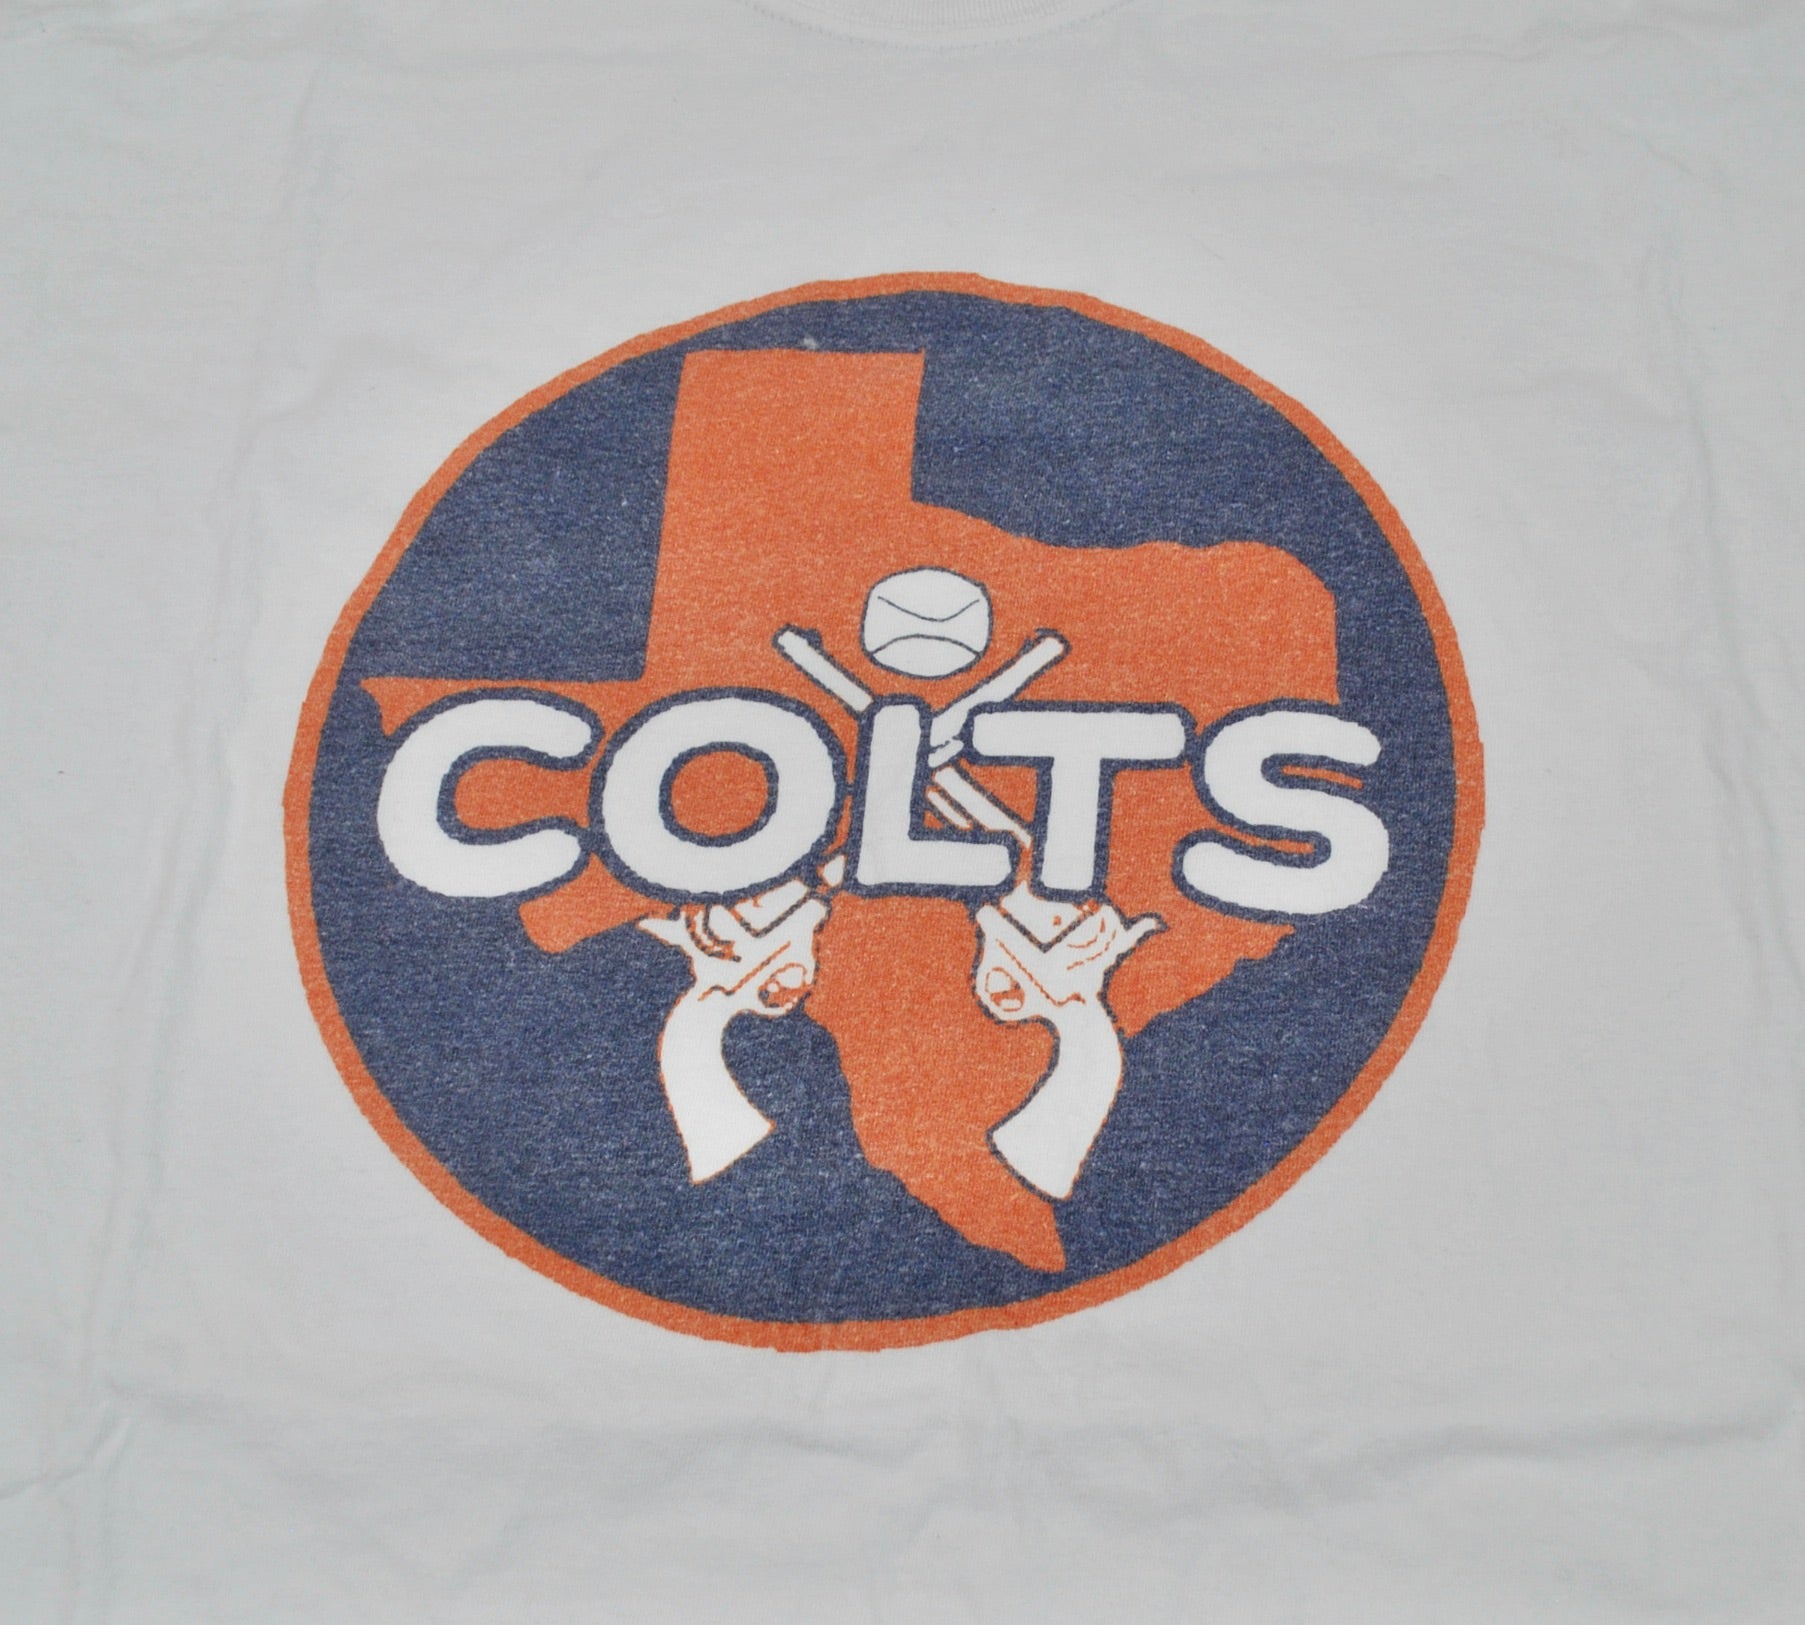 Vintage Houston Colts Shirt Size 2X-Large – Yesterday's Attic